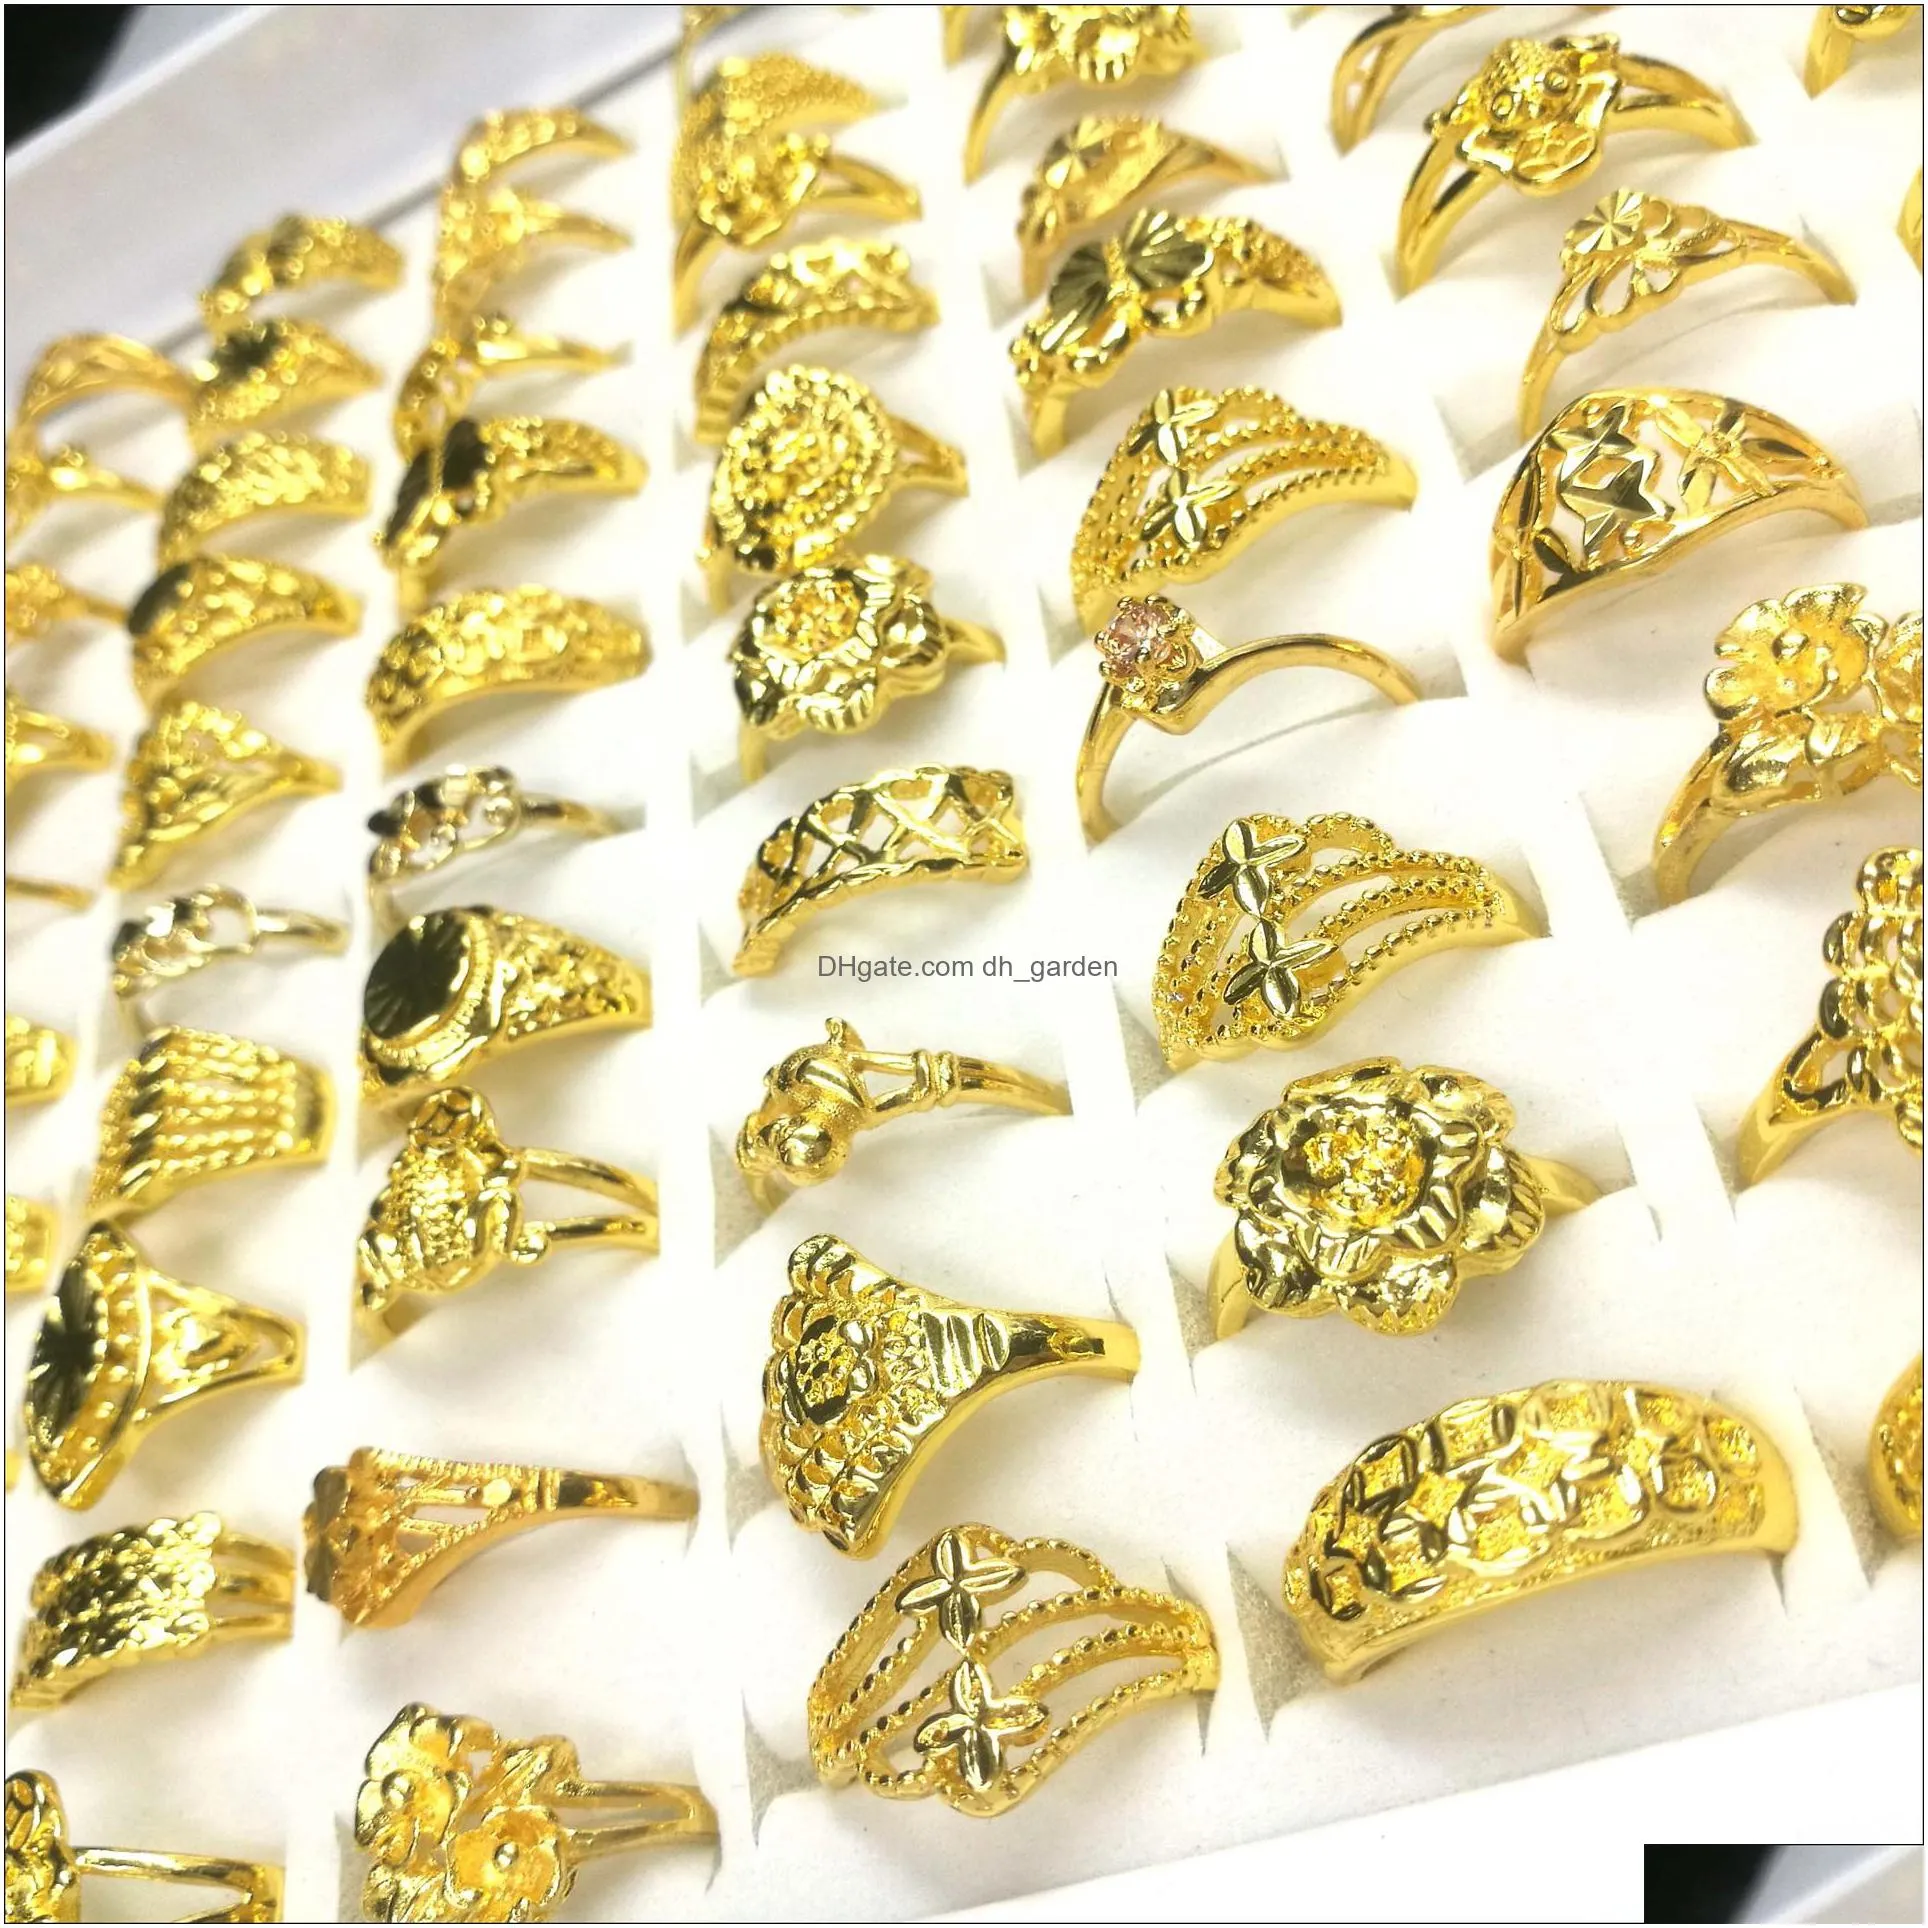 50pcs / gold plated gold ring fashion design charm ring hip hop dance party ladies jewelry